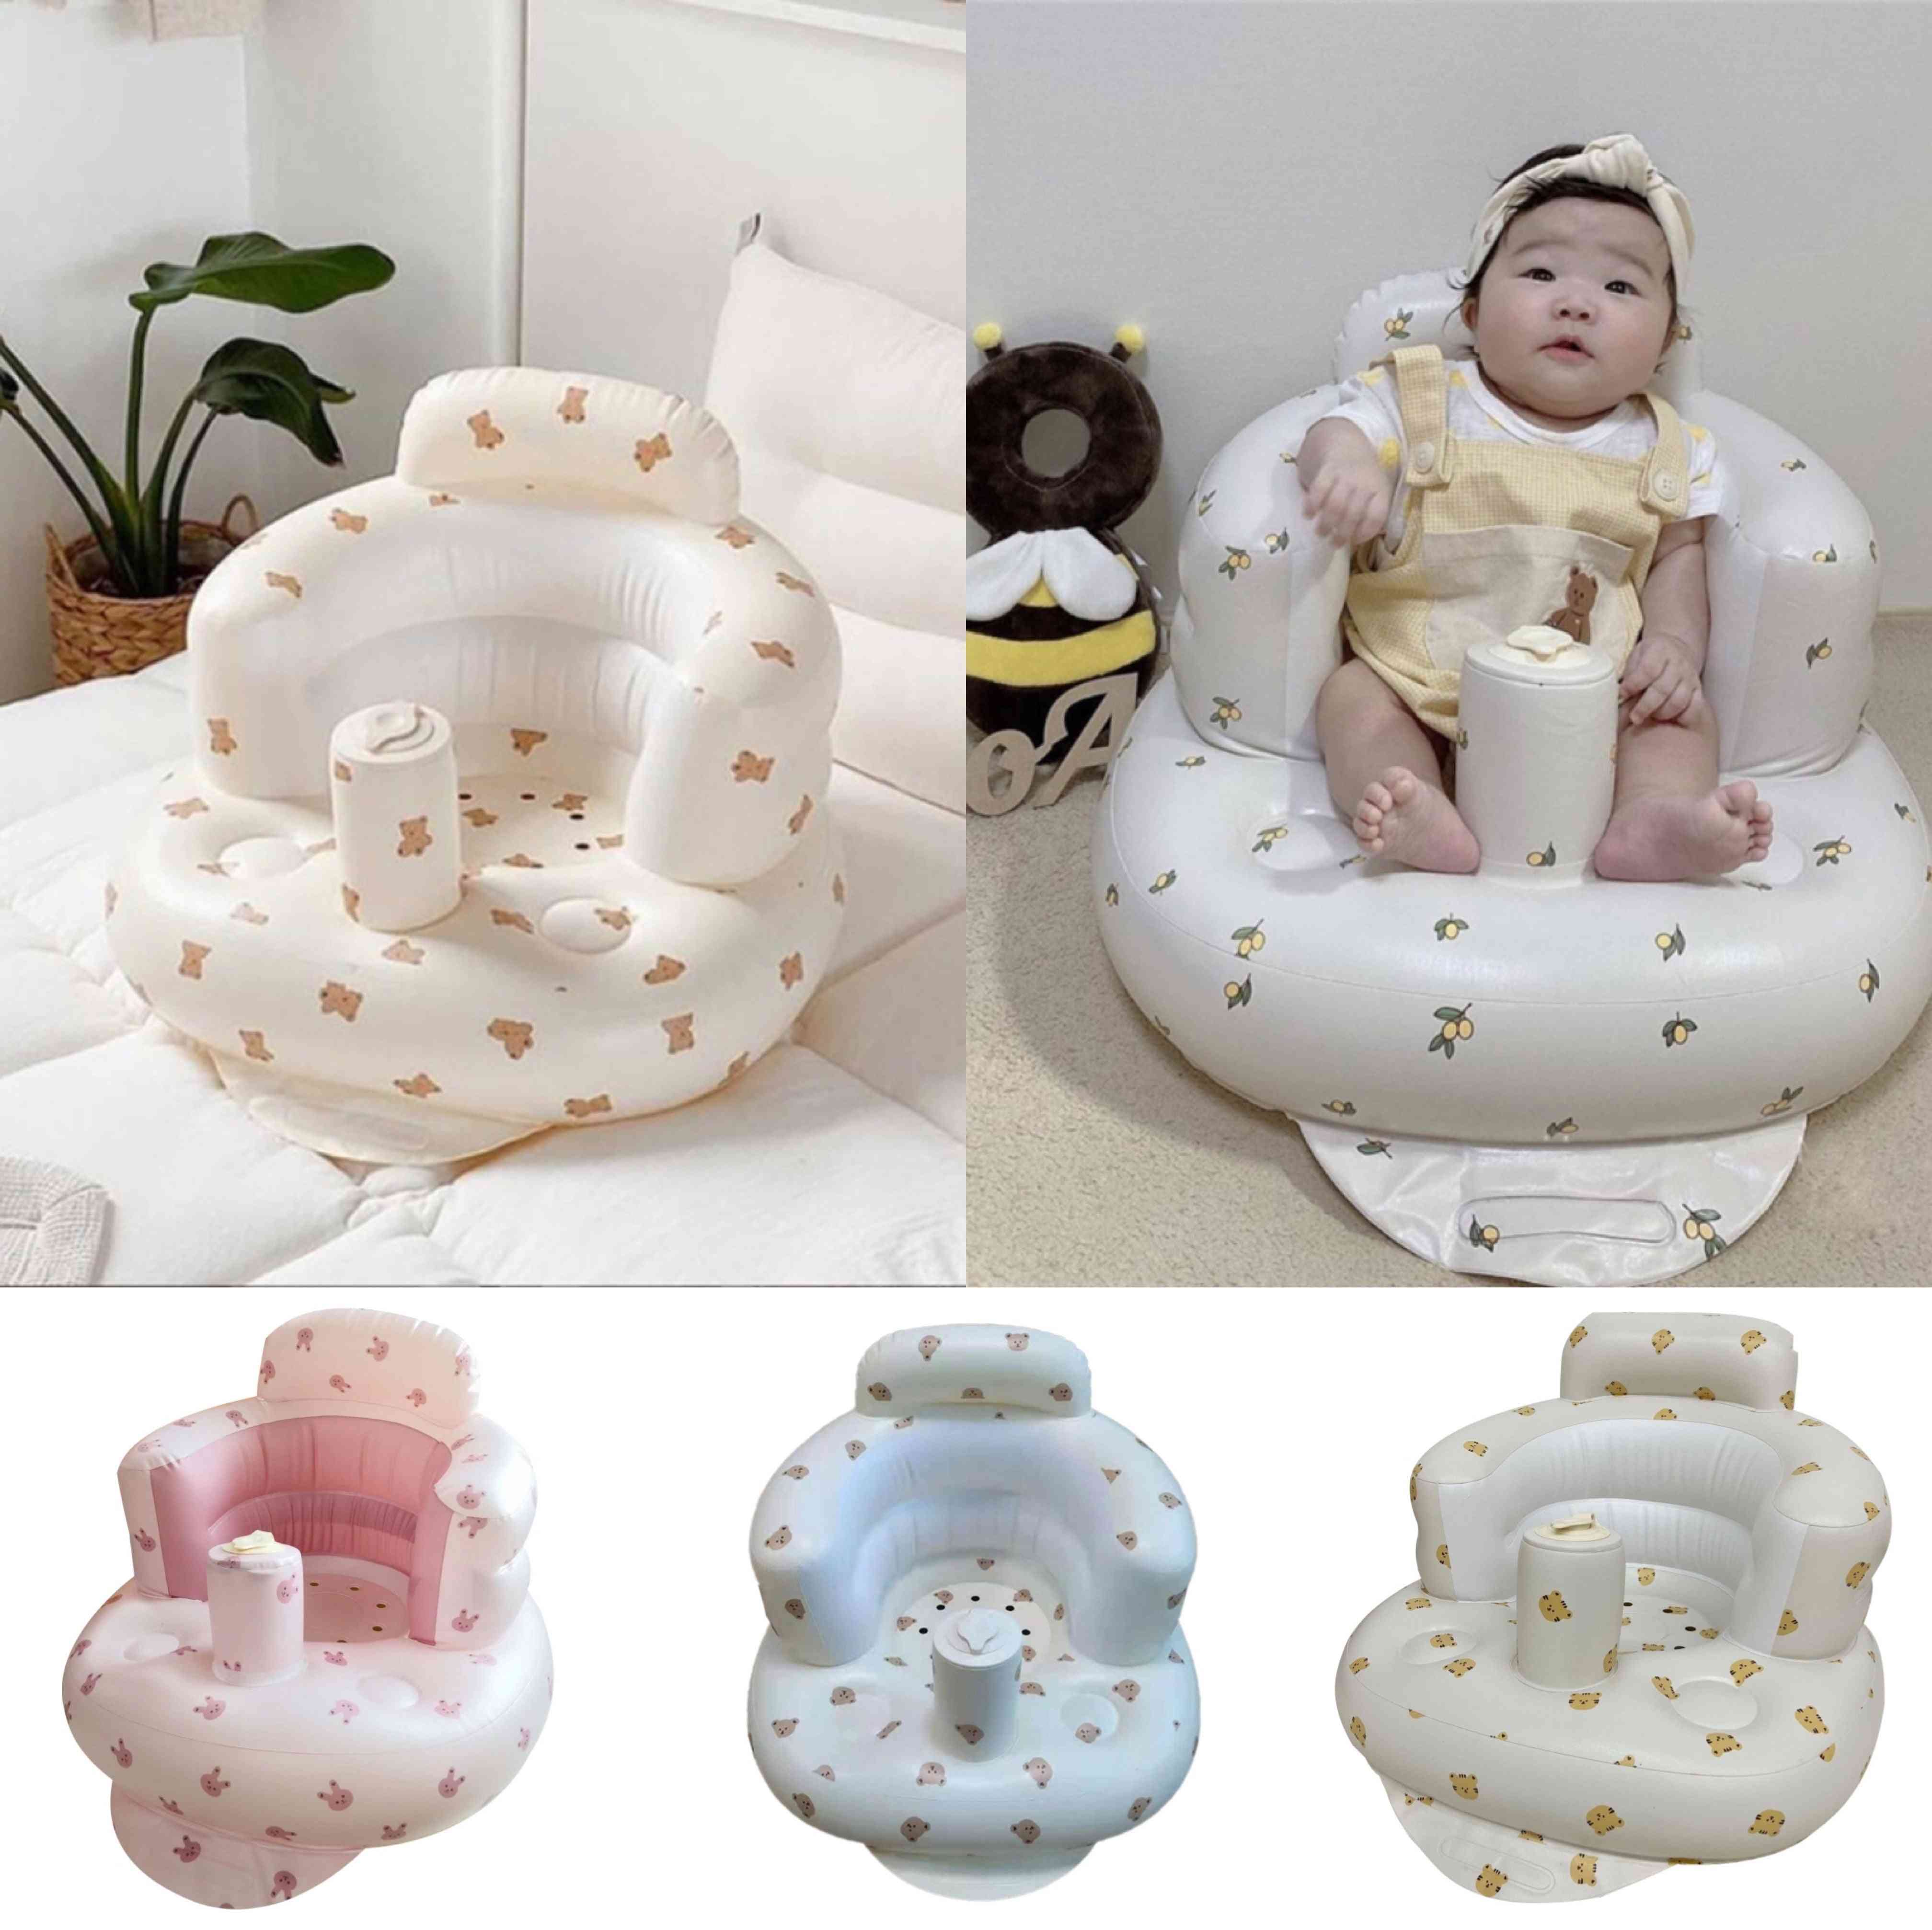 Multifunctional Baby Pvc Inflatable Seat Inflatable Bathroom Sofa Learning Eating Dinner Chair Bathing Stool